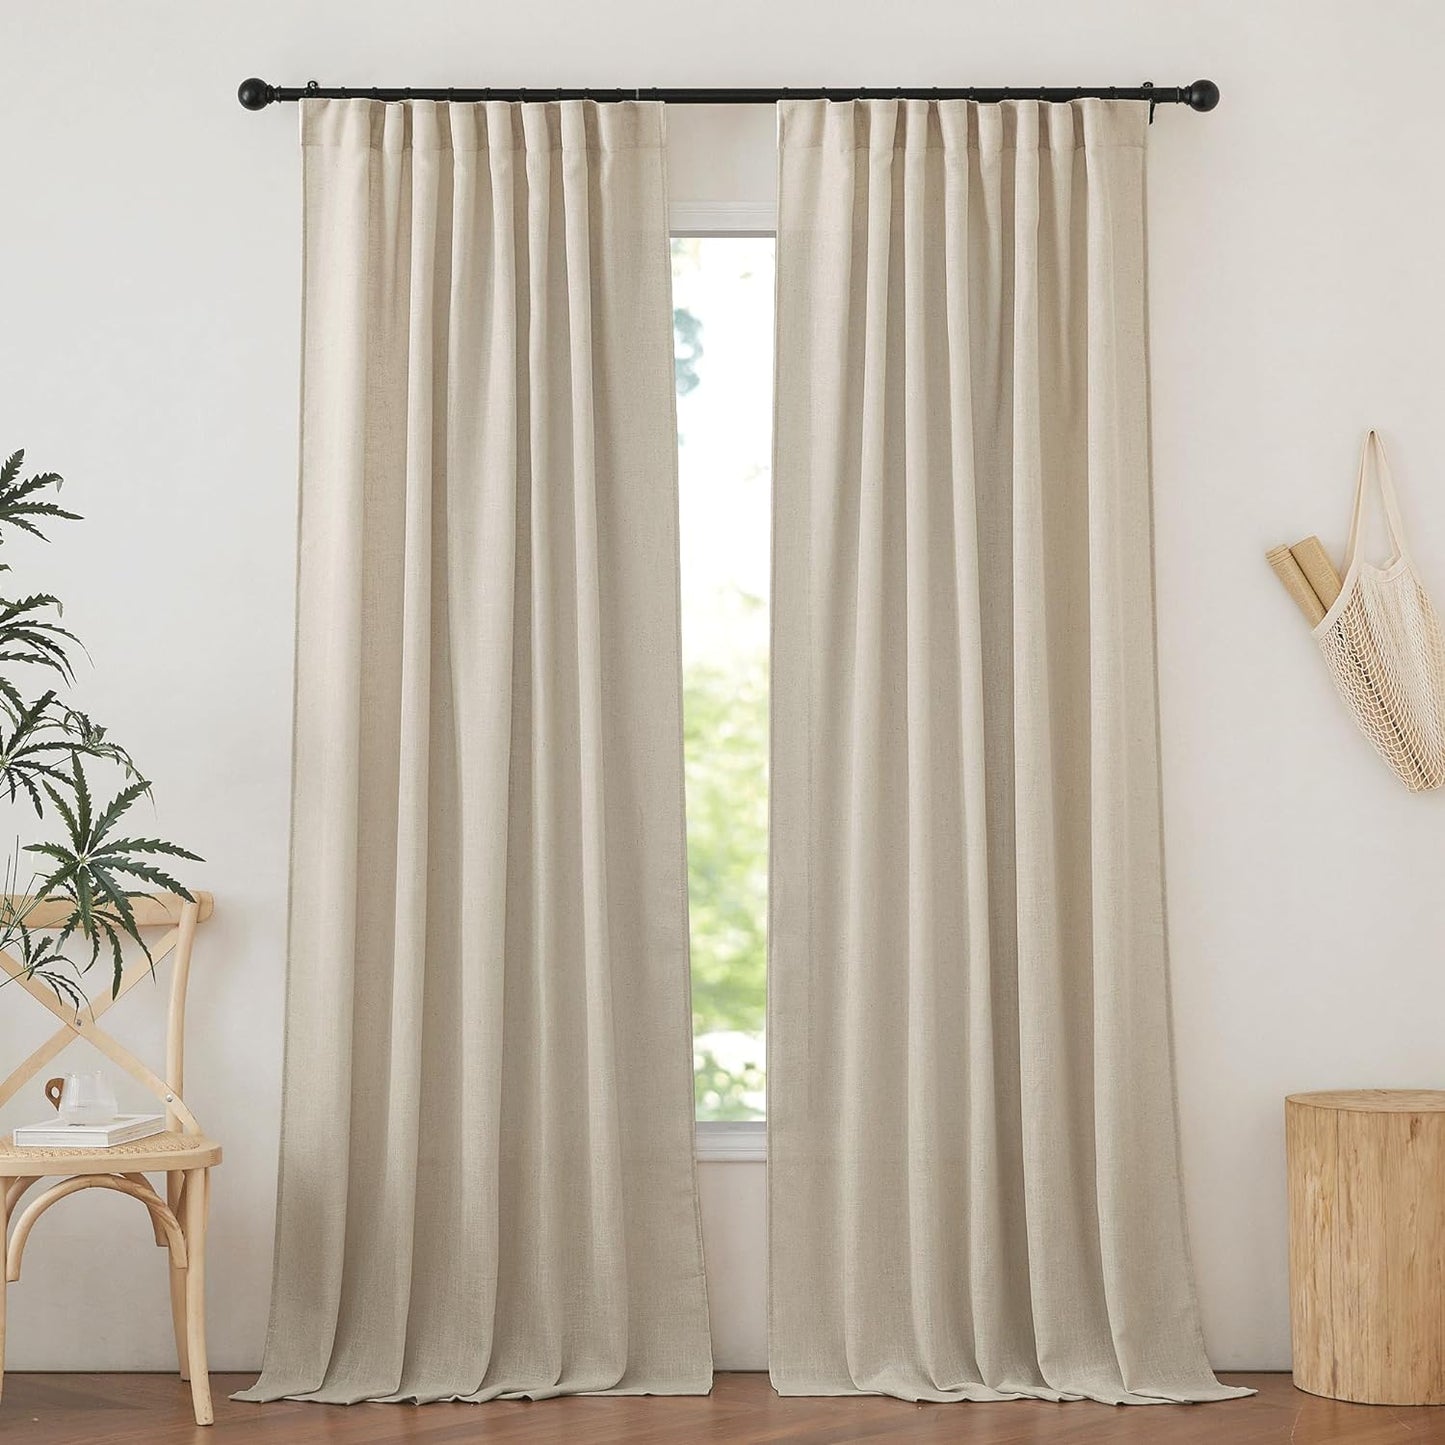 NICETOWN Linen Textured Curtain for Bedroom/Living Room Thermal Insulated Back Tab Linen Look Curtain Drapes Soft Rich Material Light Reducing Drape Panels for Window, 2 Panels, 52 X 84 Inch, Linen  NICETOWN Taupe W52 X L84 